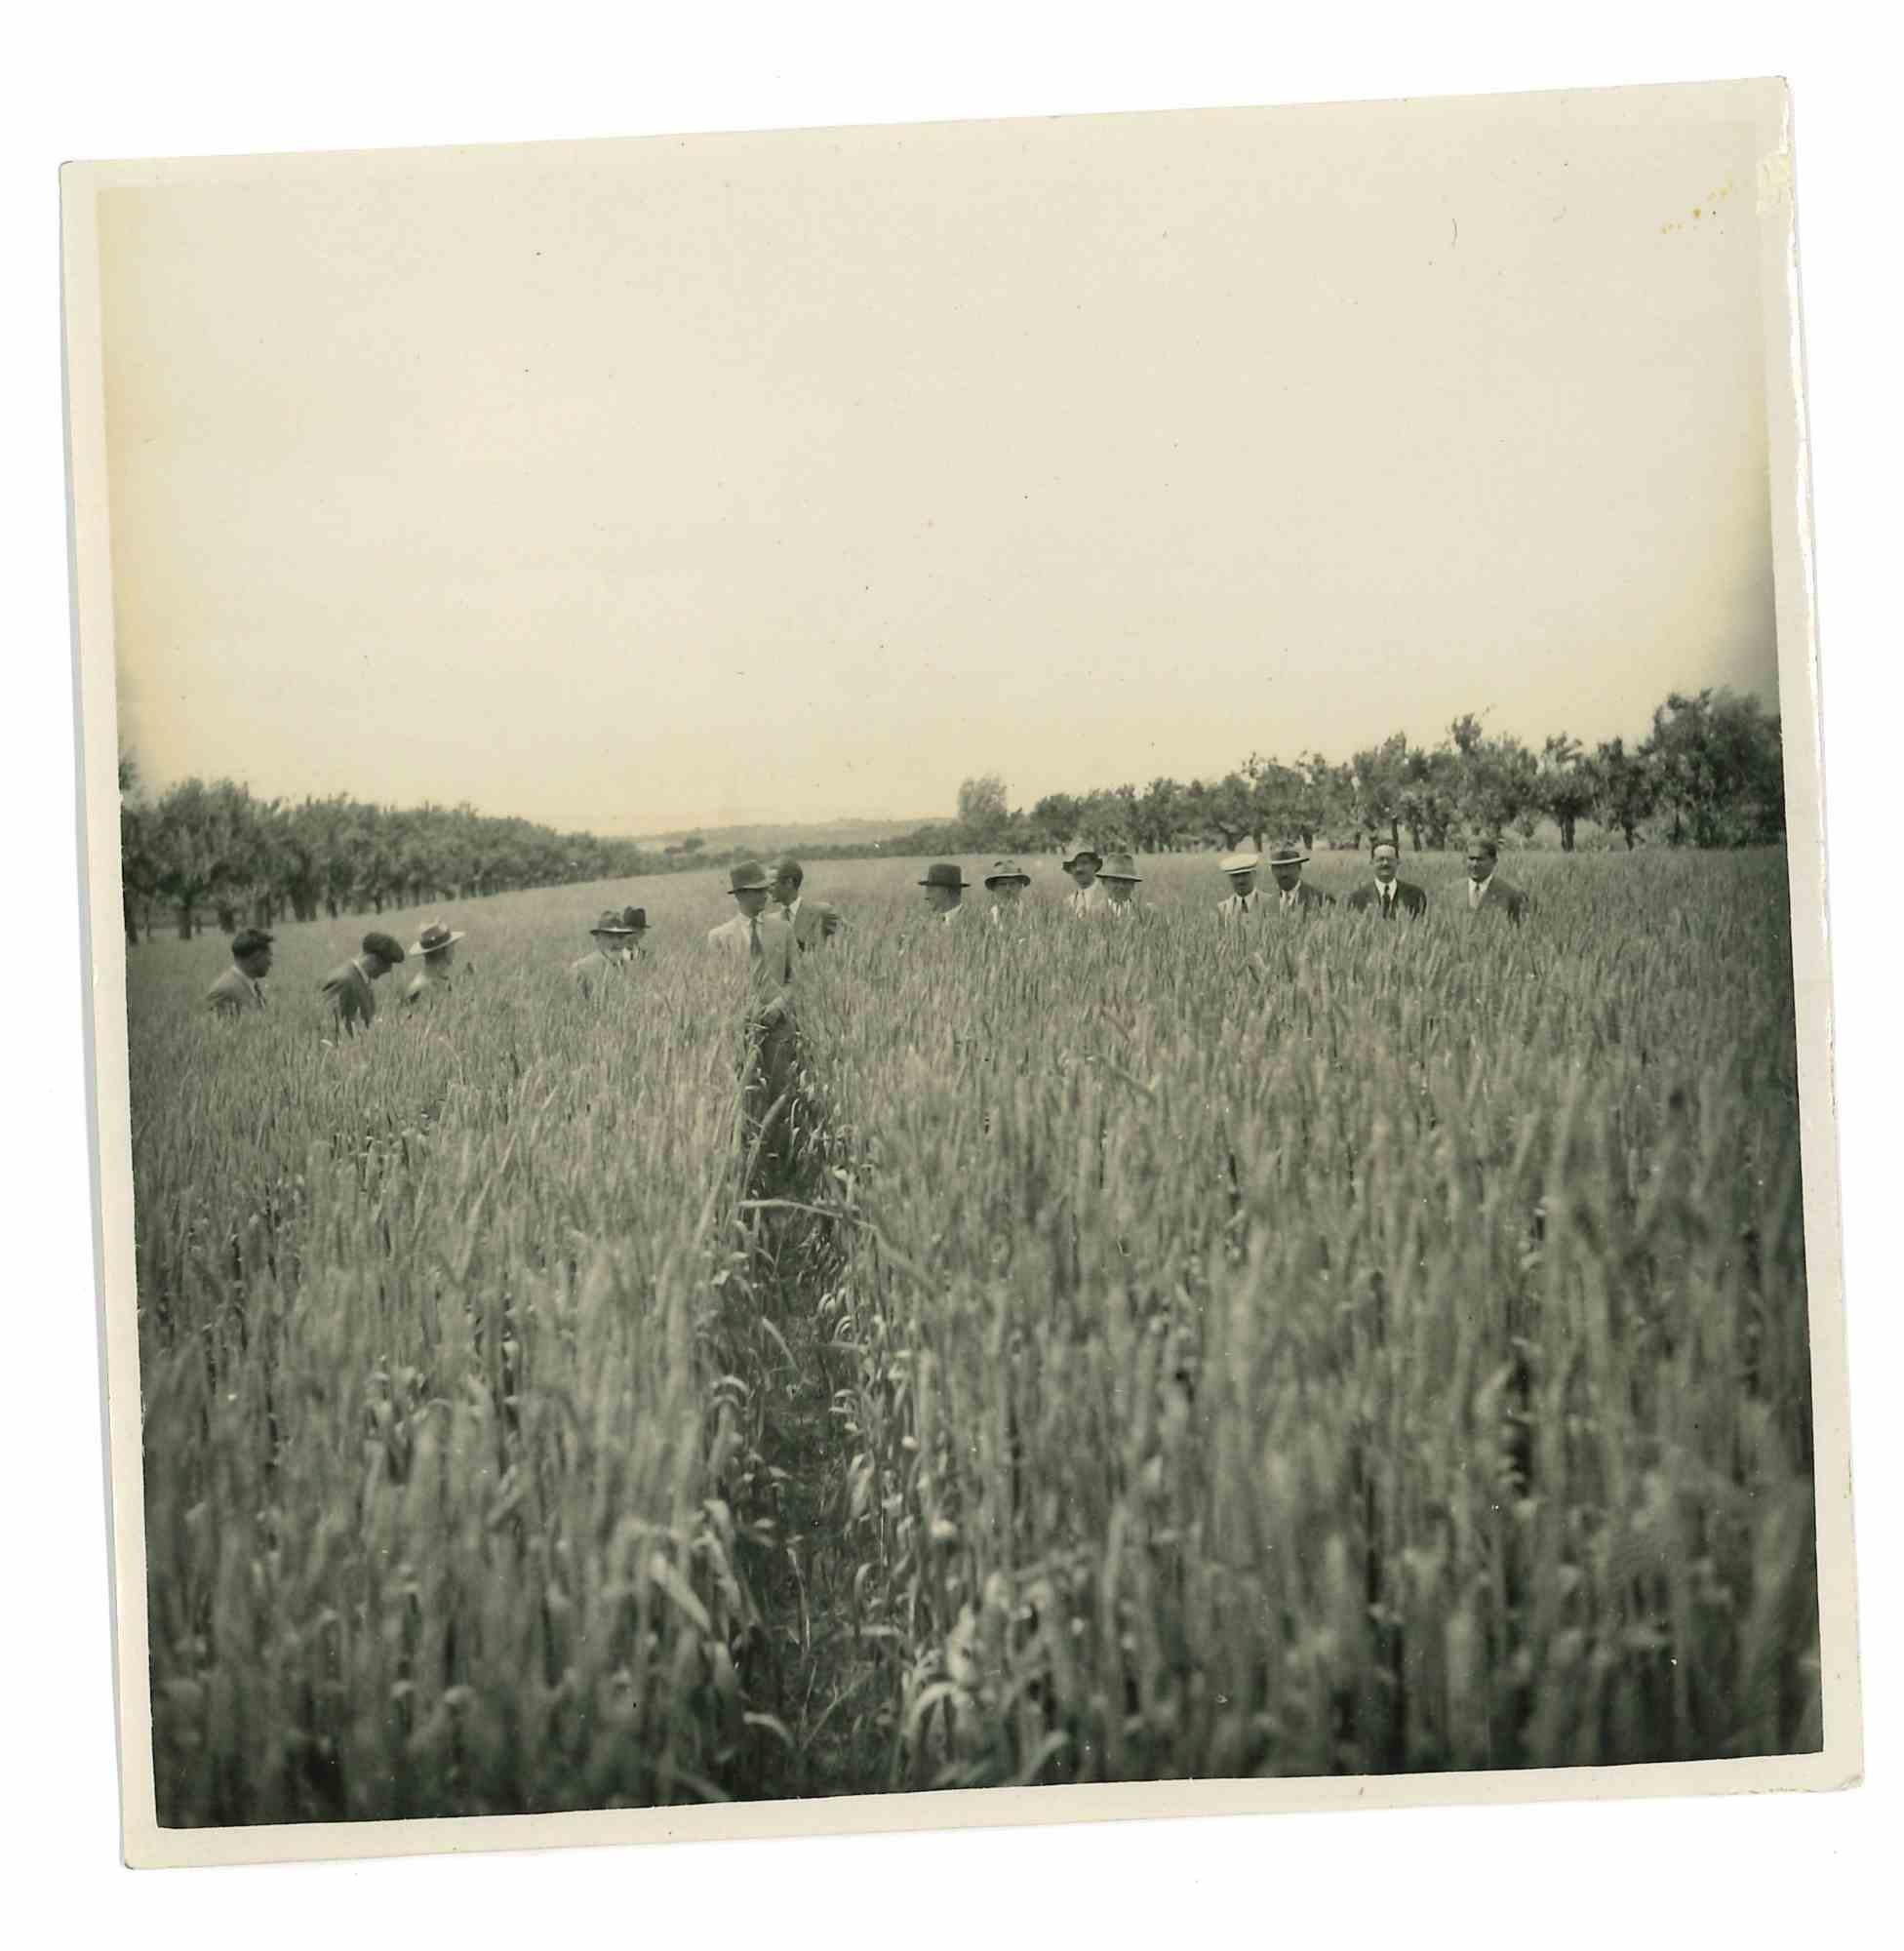 The Old Days - Men in Field - Early 20th Century